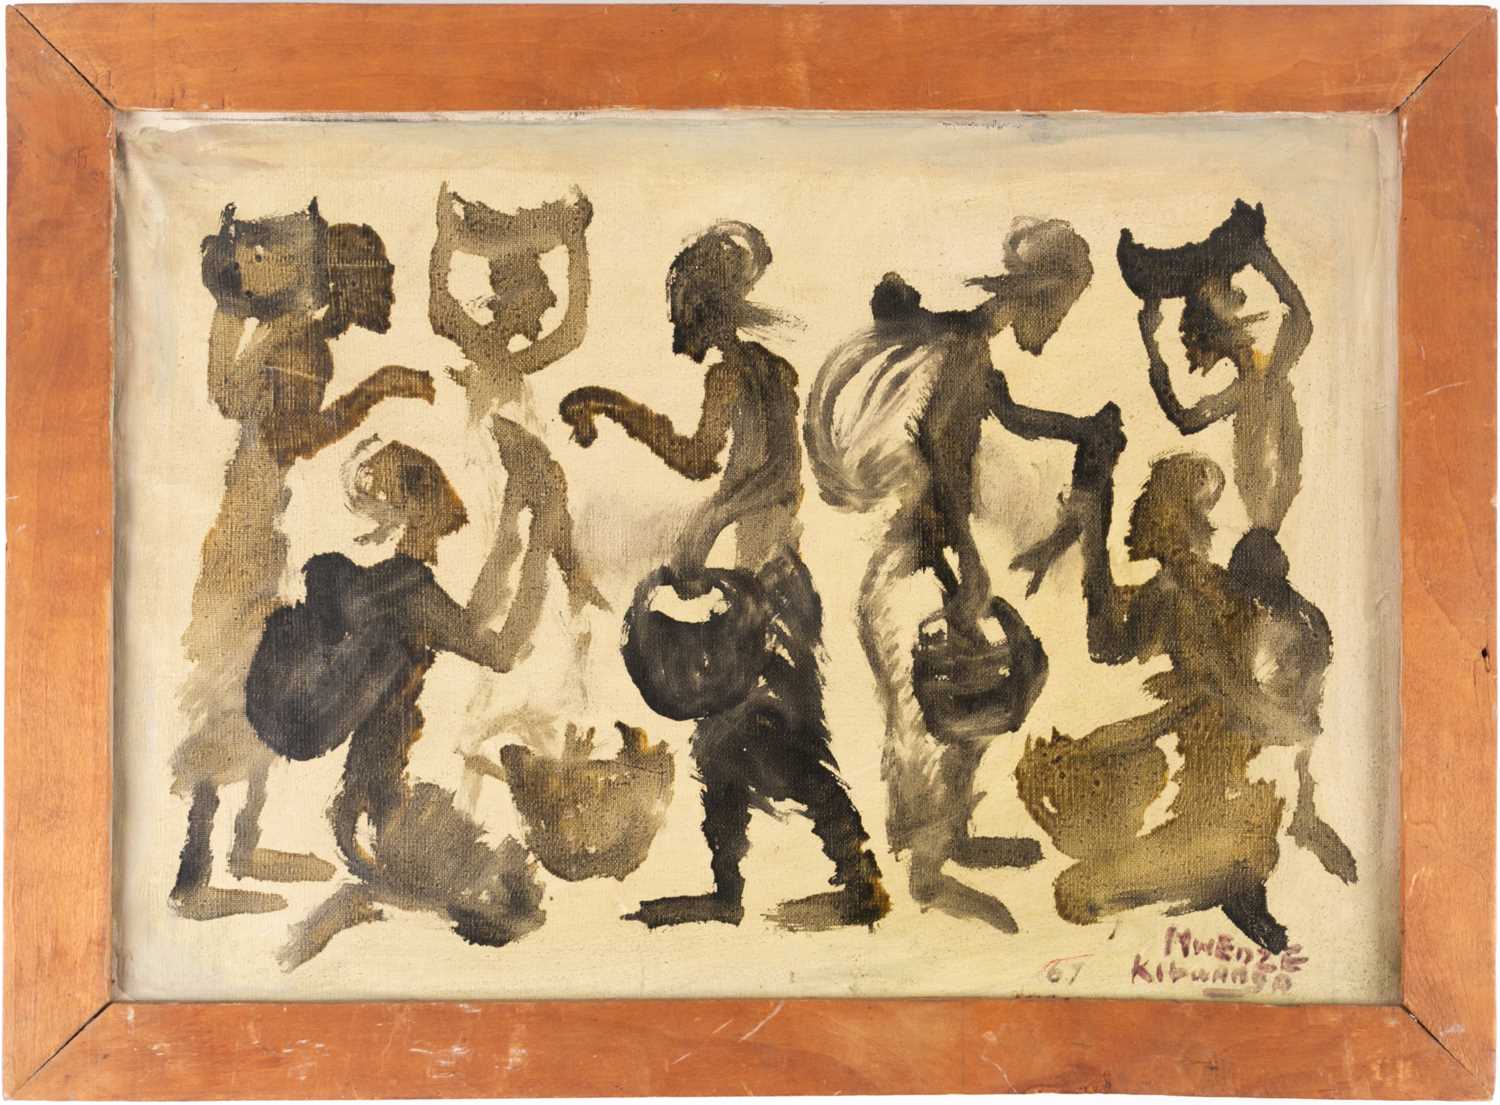 Attributed to Mwenze Kibwanga (1925-1999) Congolese, abstract study of fish sellers at work, oil